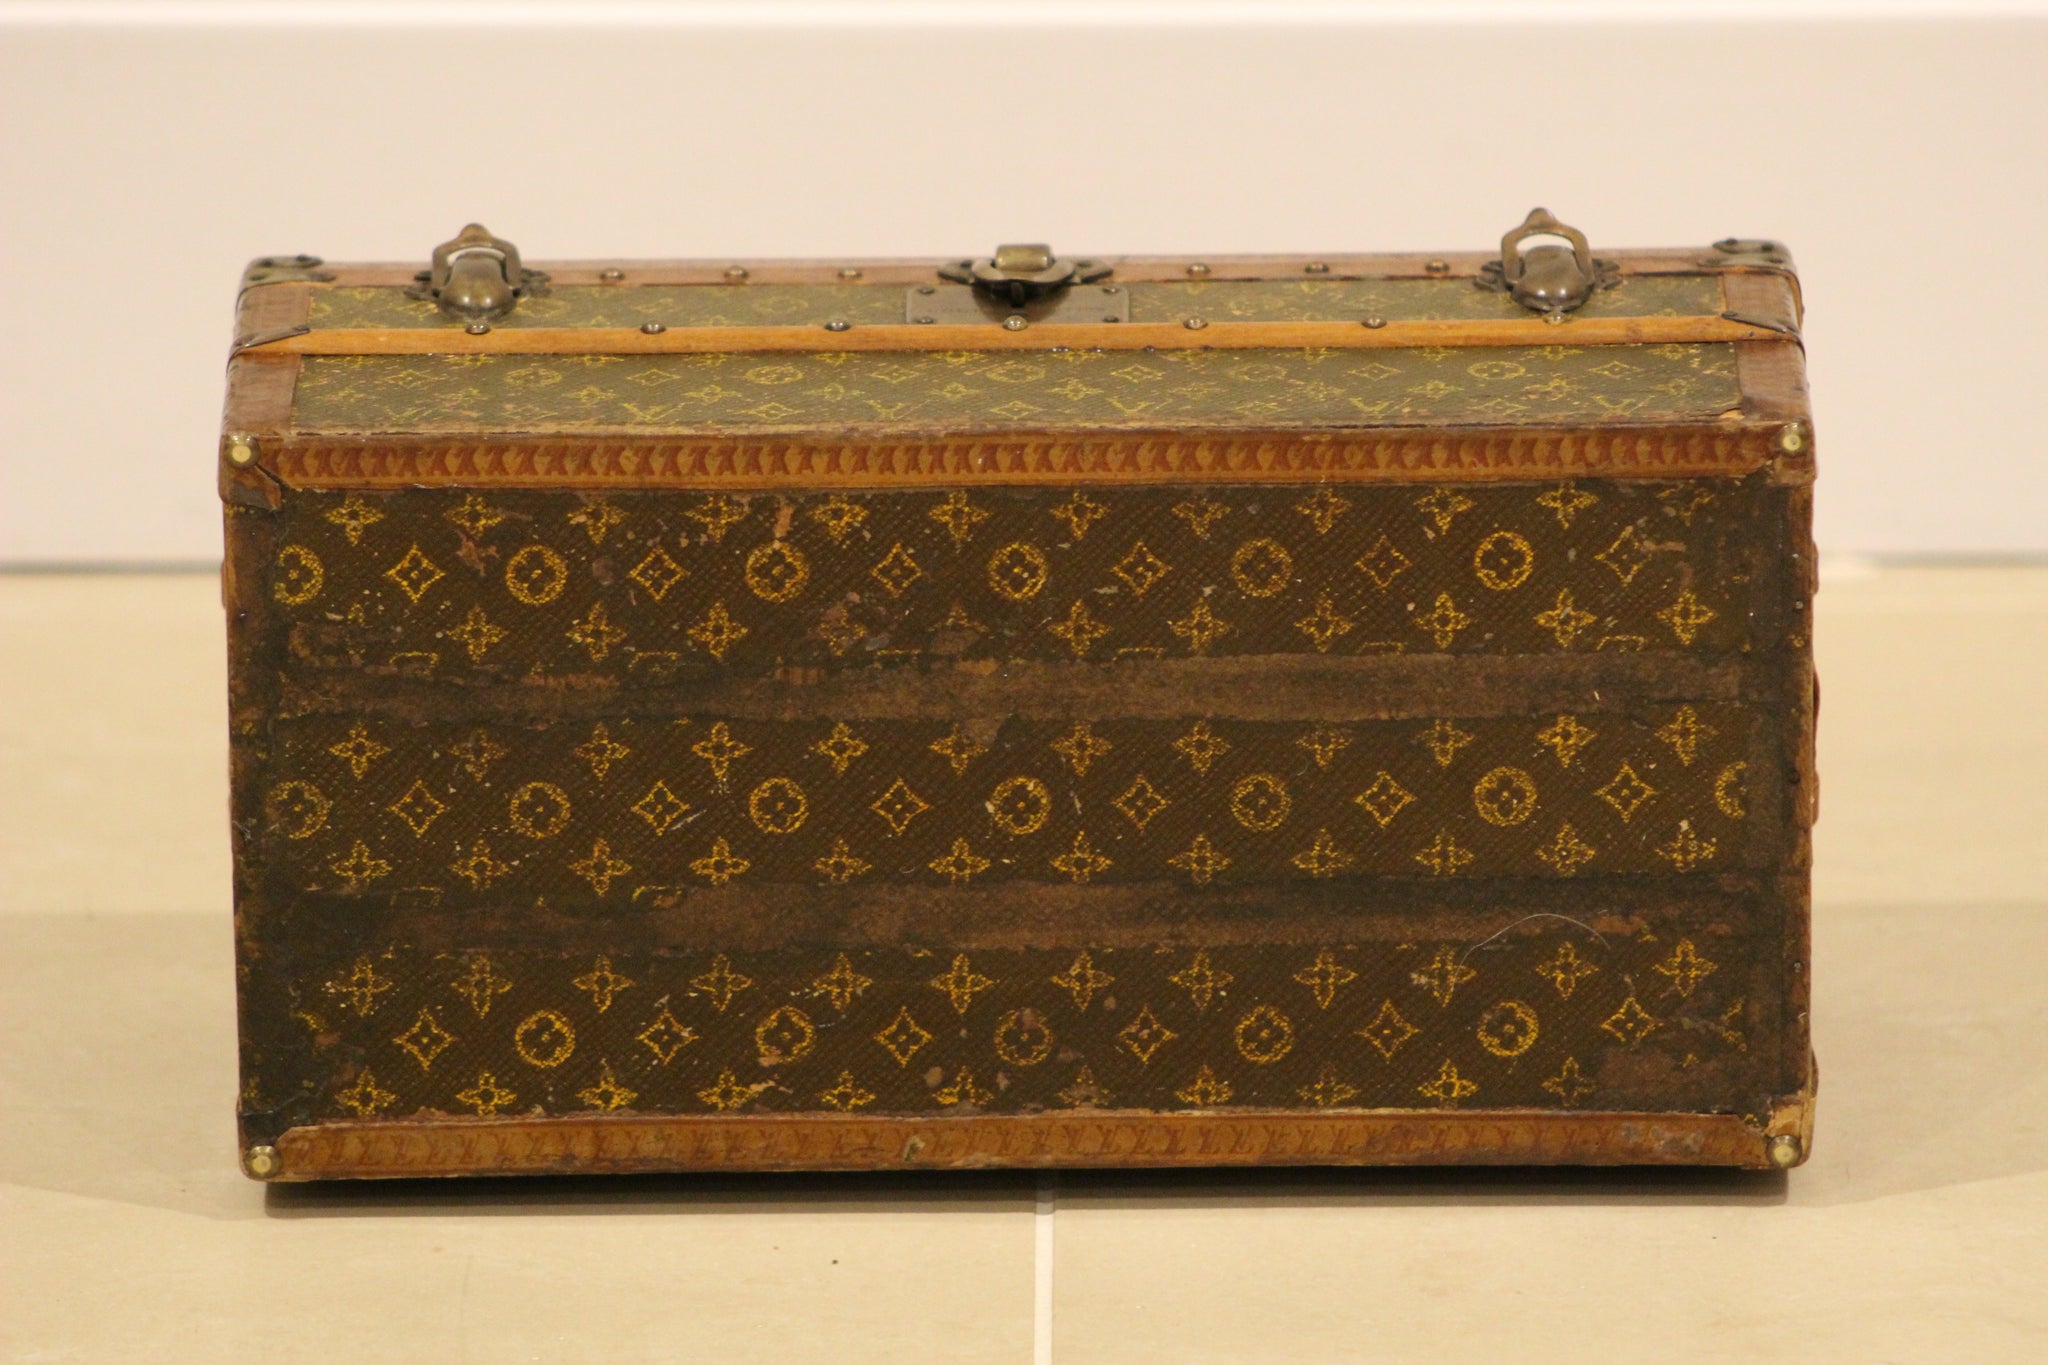 The History Of The Zinc Louis Vuitton Trunk